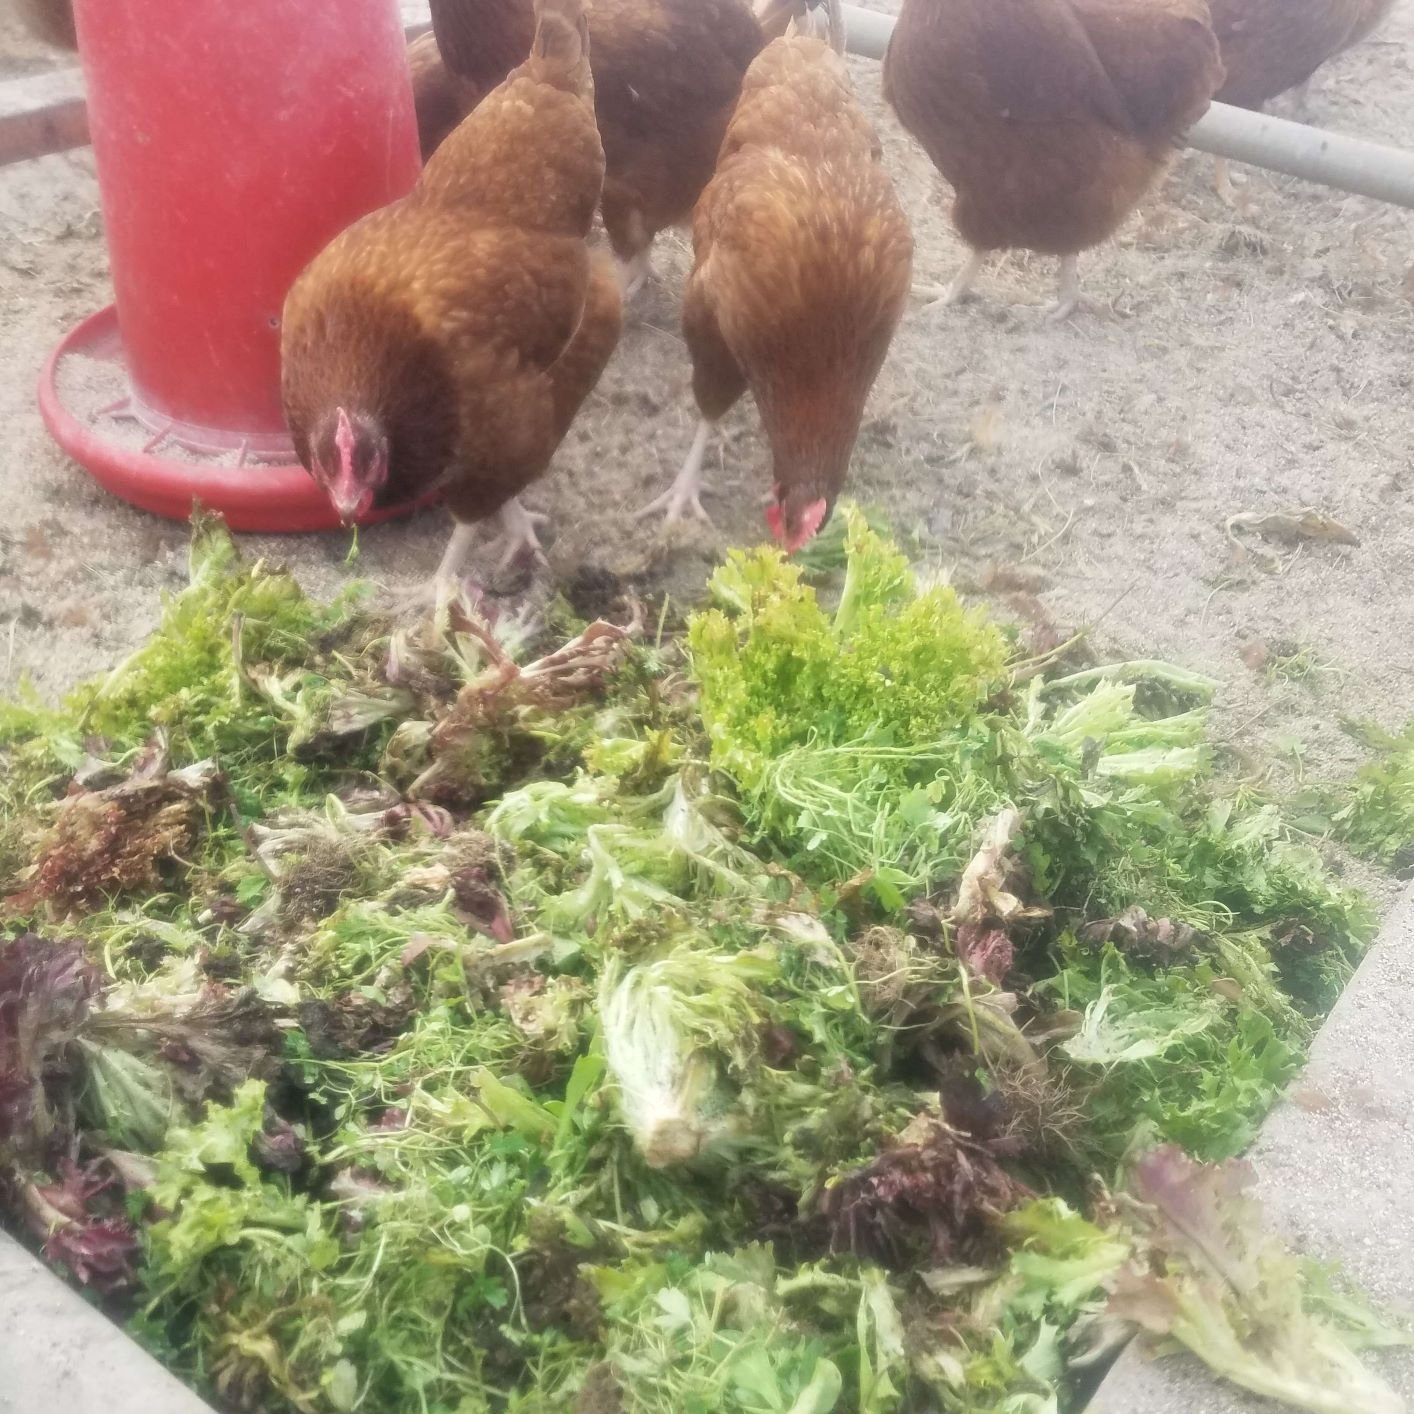 Farm Happenings for March 6, 2019: Week 8 of 10!